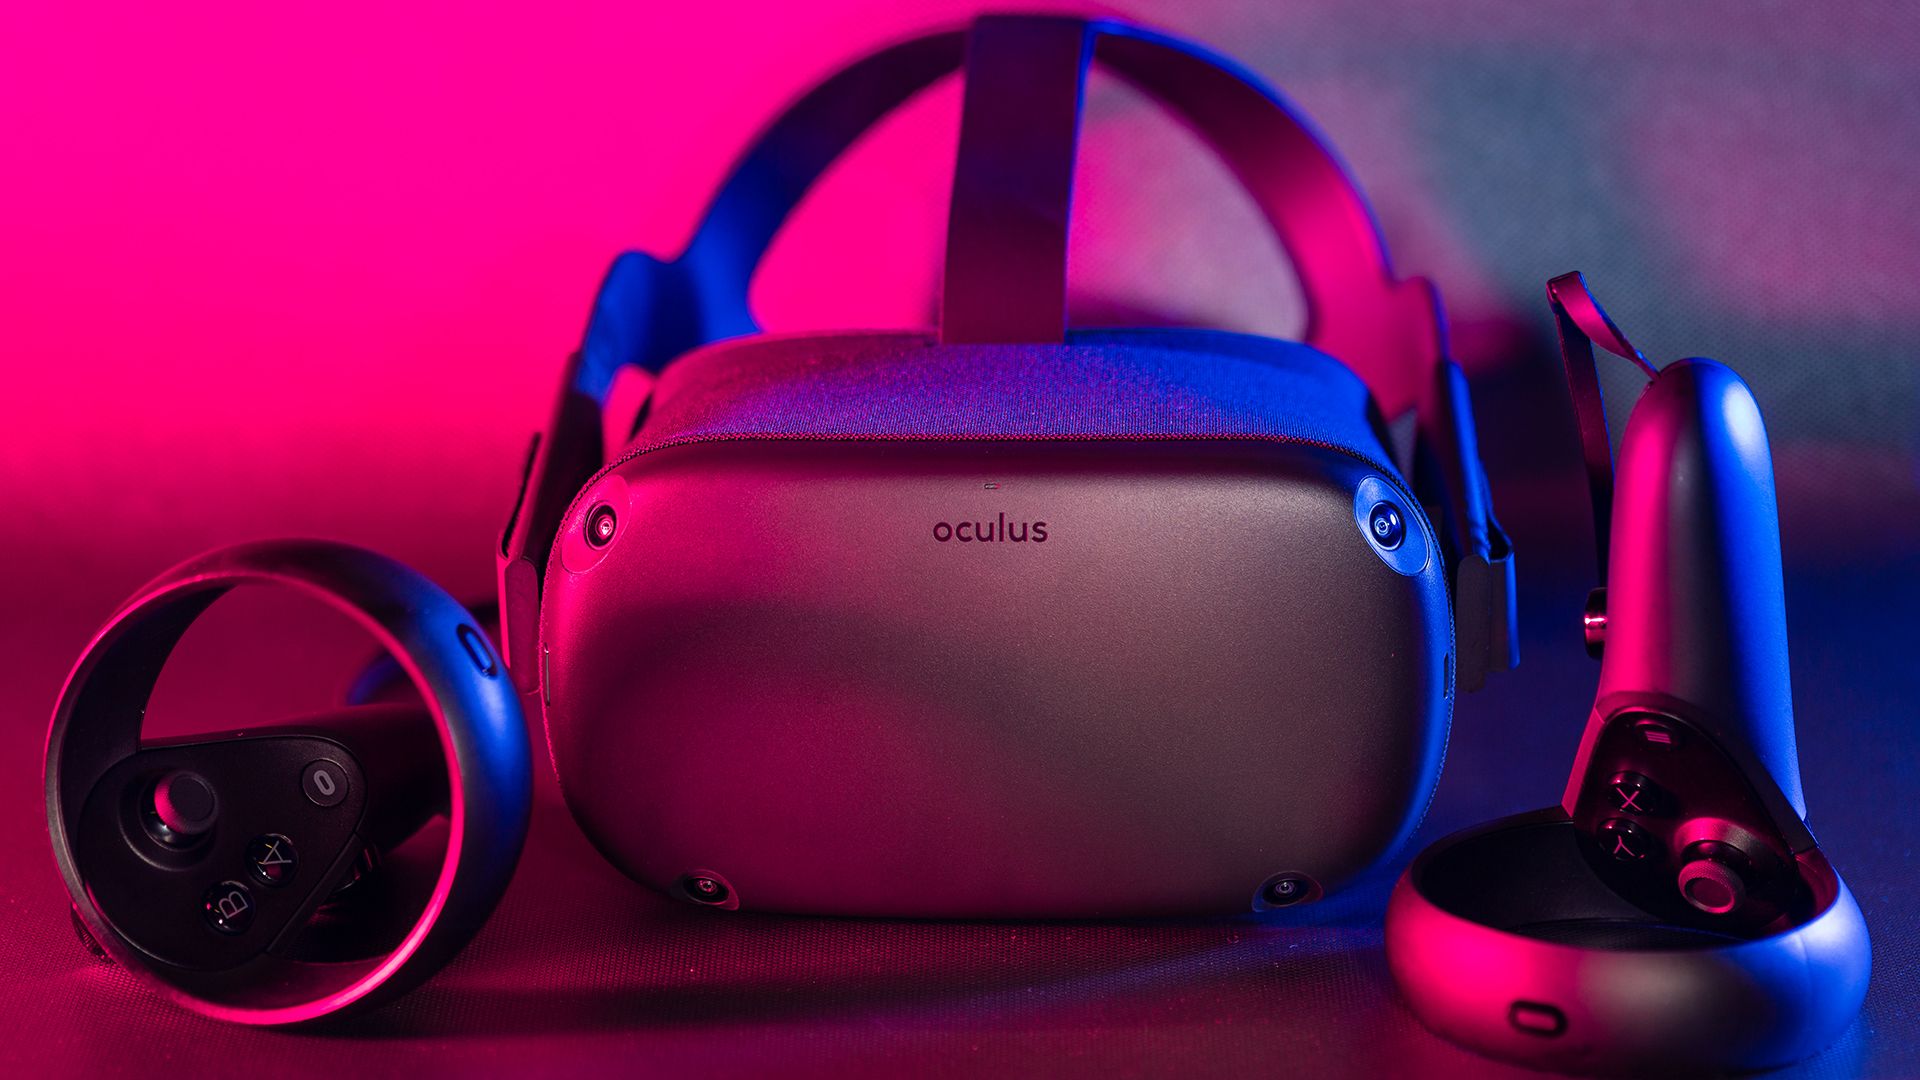 Oculus Quest: Every Non Gaming App You Should Check Out